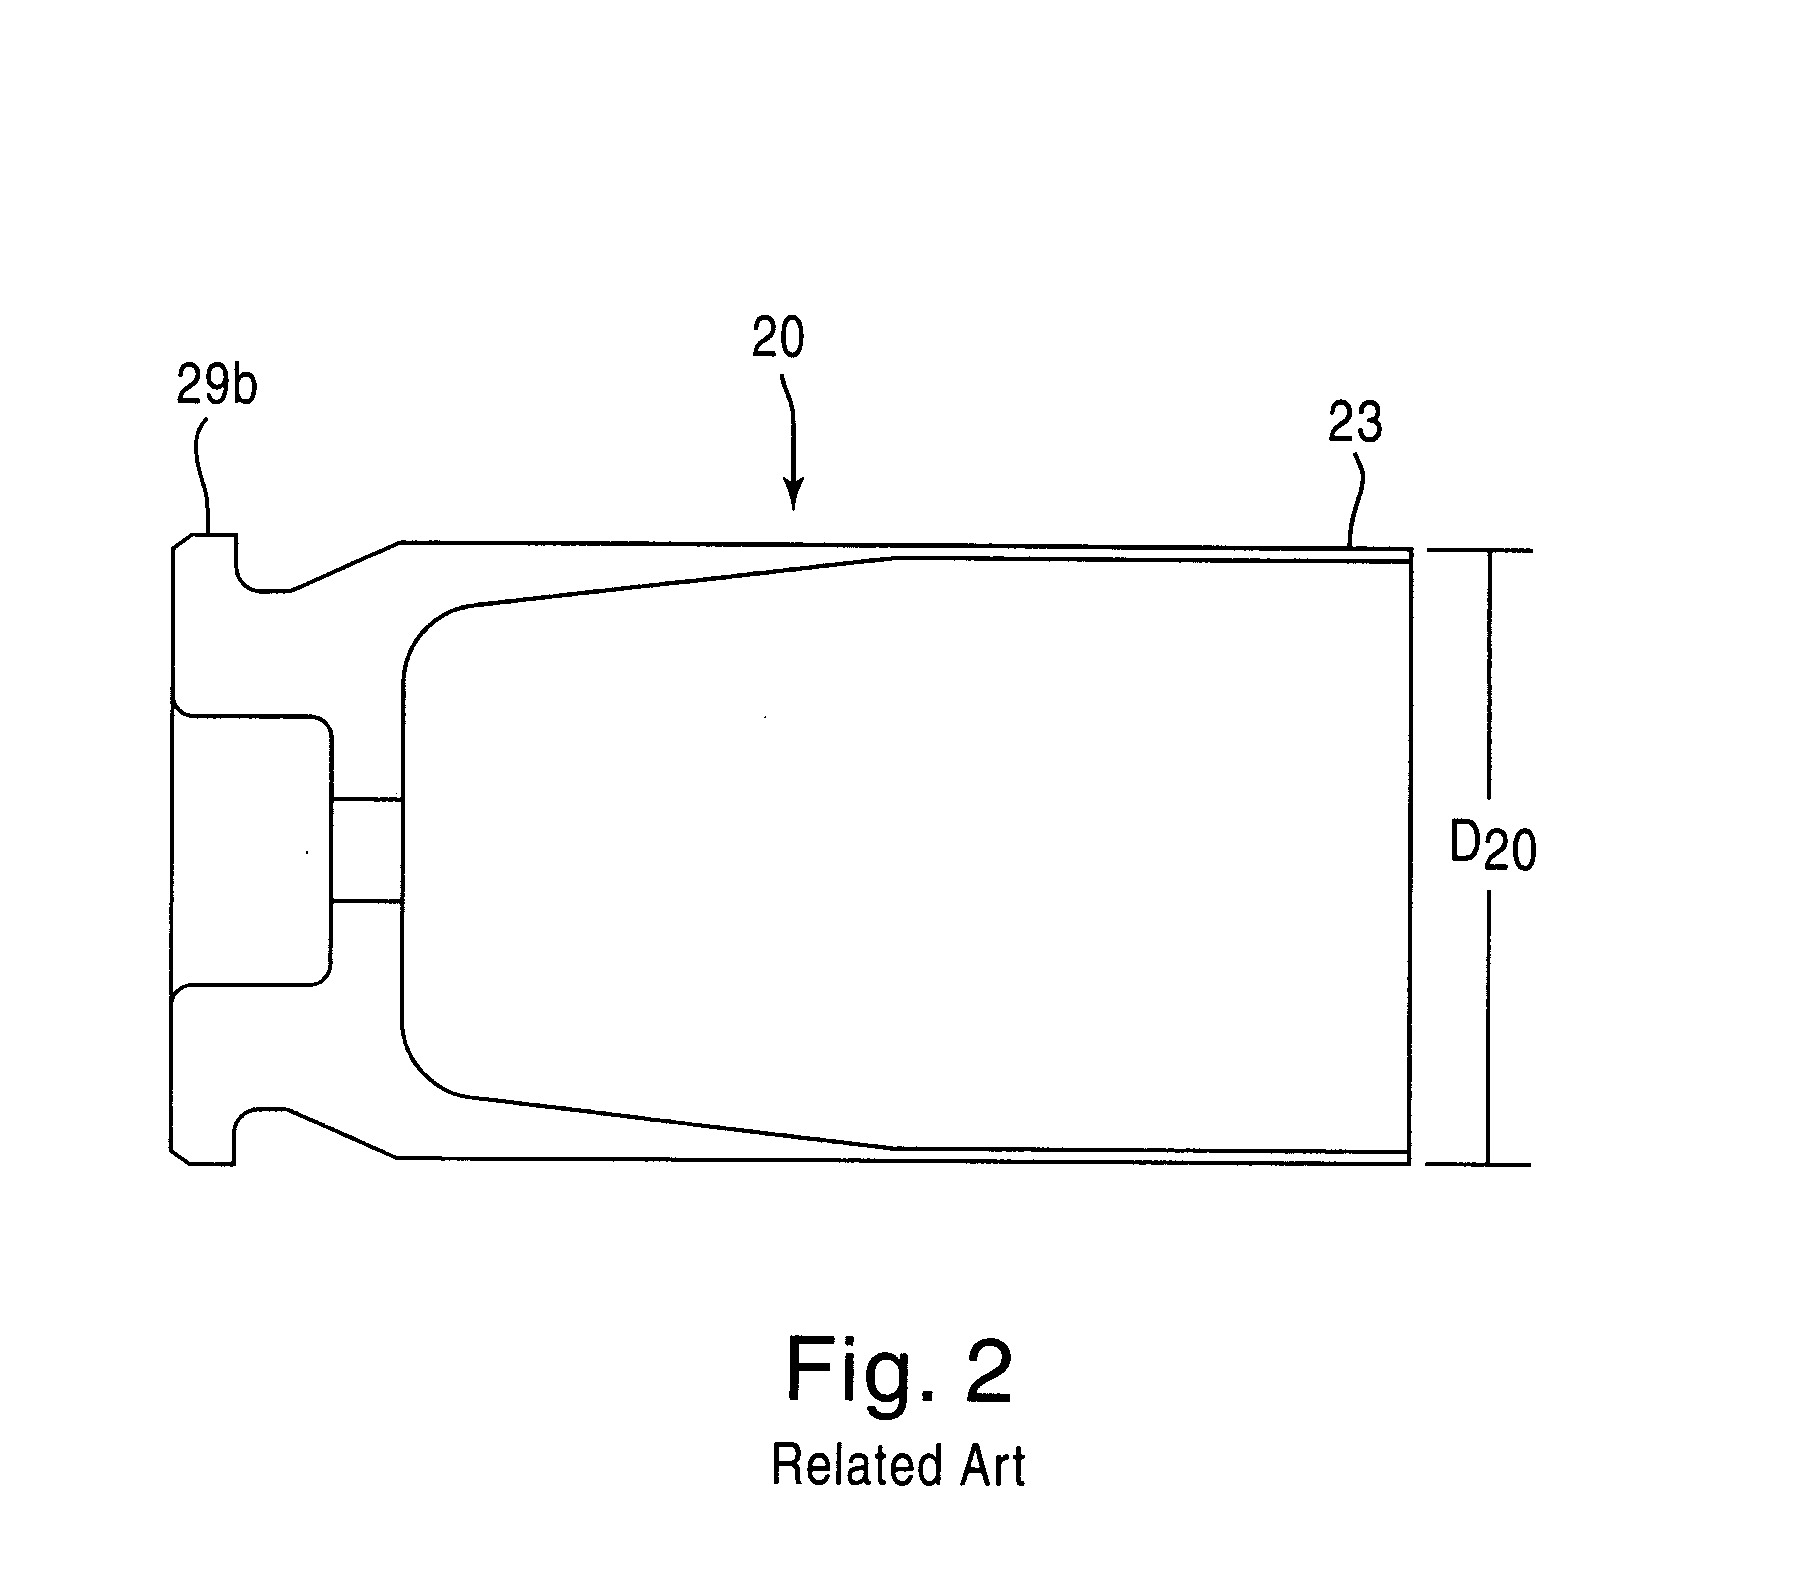 Lead free, composite polymer based bullet and method of manufacturing